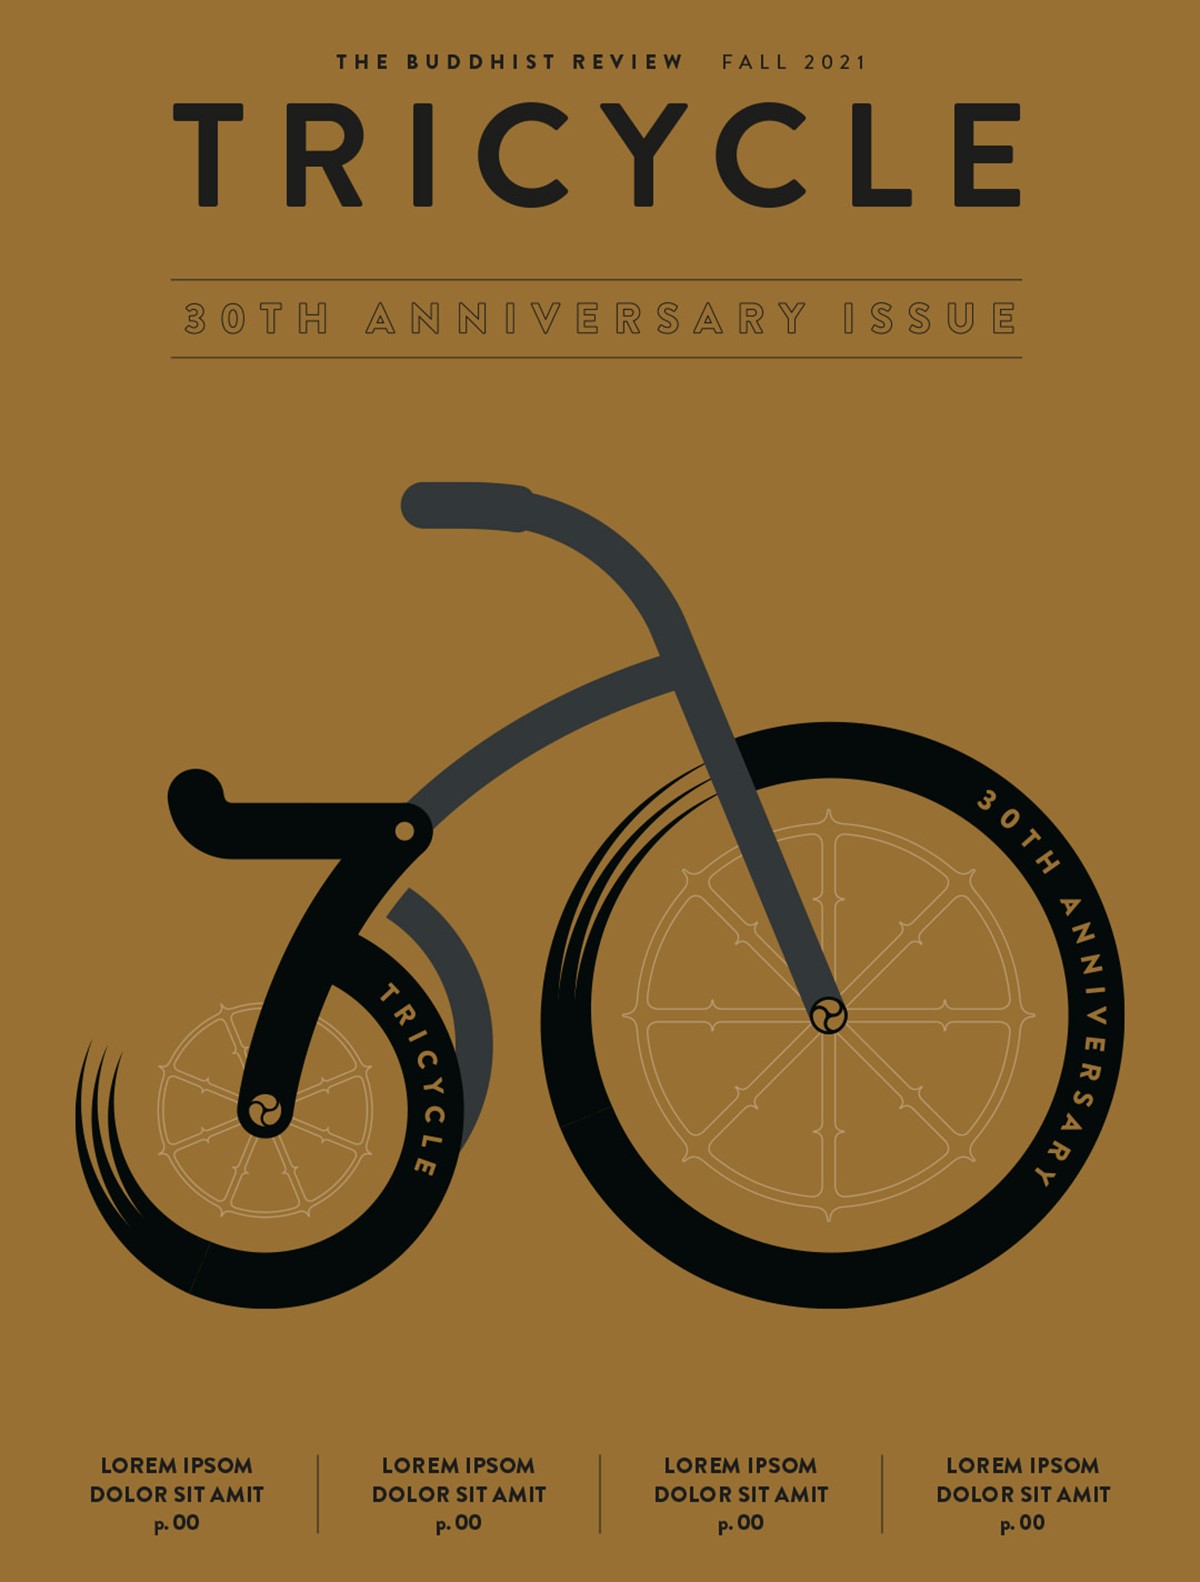 Tricycle magazine. 30th anniversary. Typographic trike design on gold by Superfried.